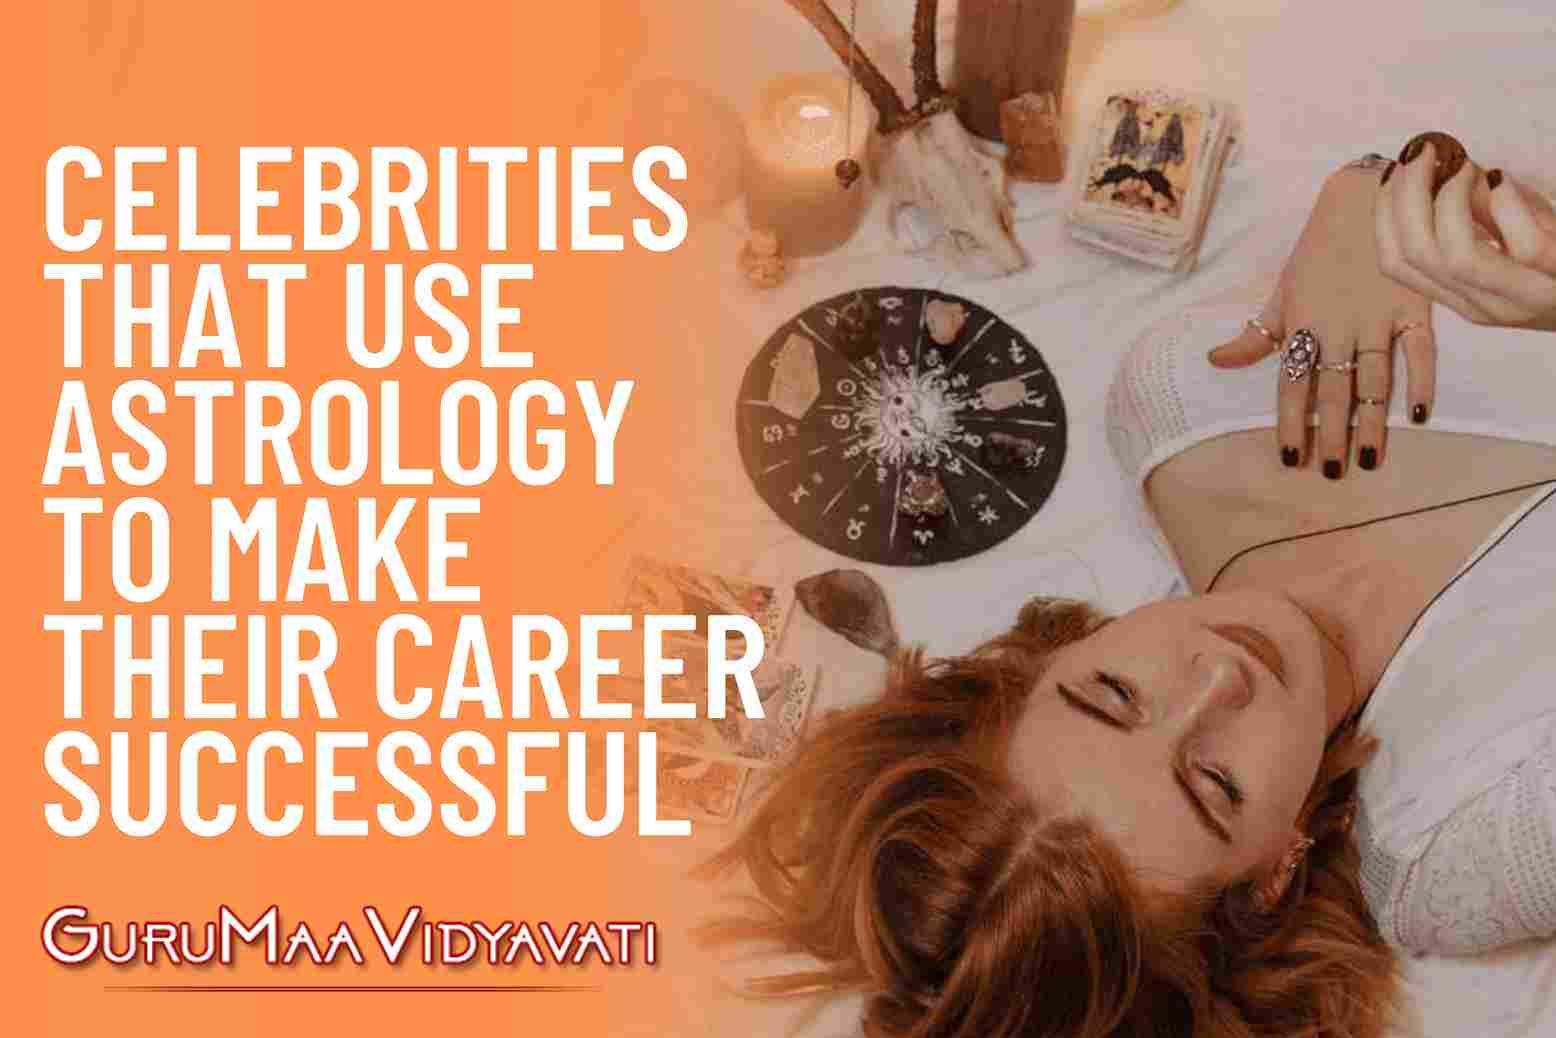 7 Celebrities That Use Astrology to Make Their Career Successful